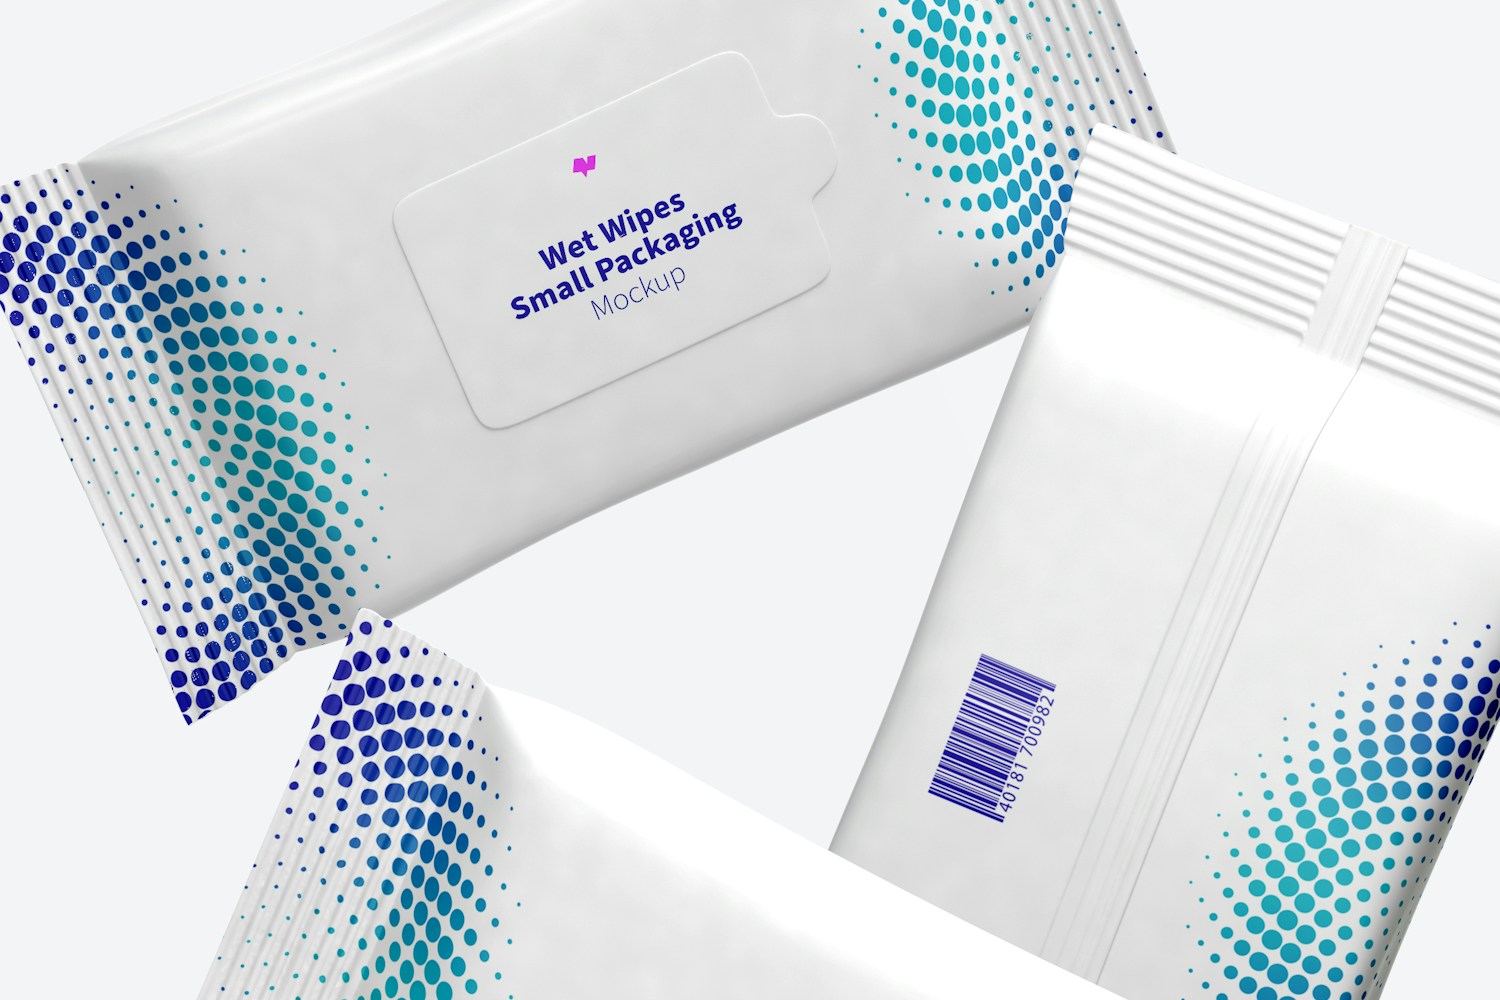 Wet Wipes Small Packaging Mockup, Floating